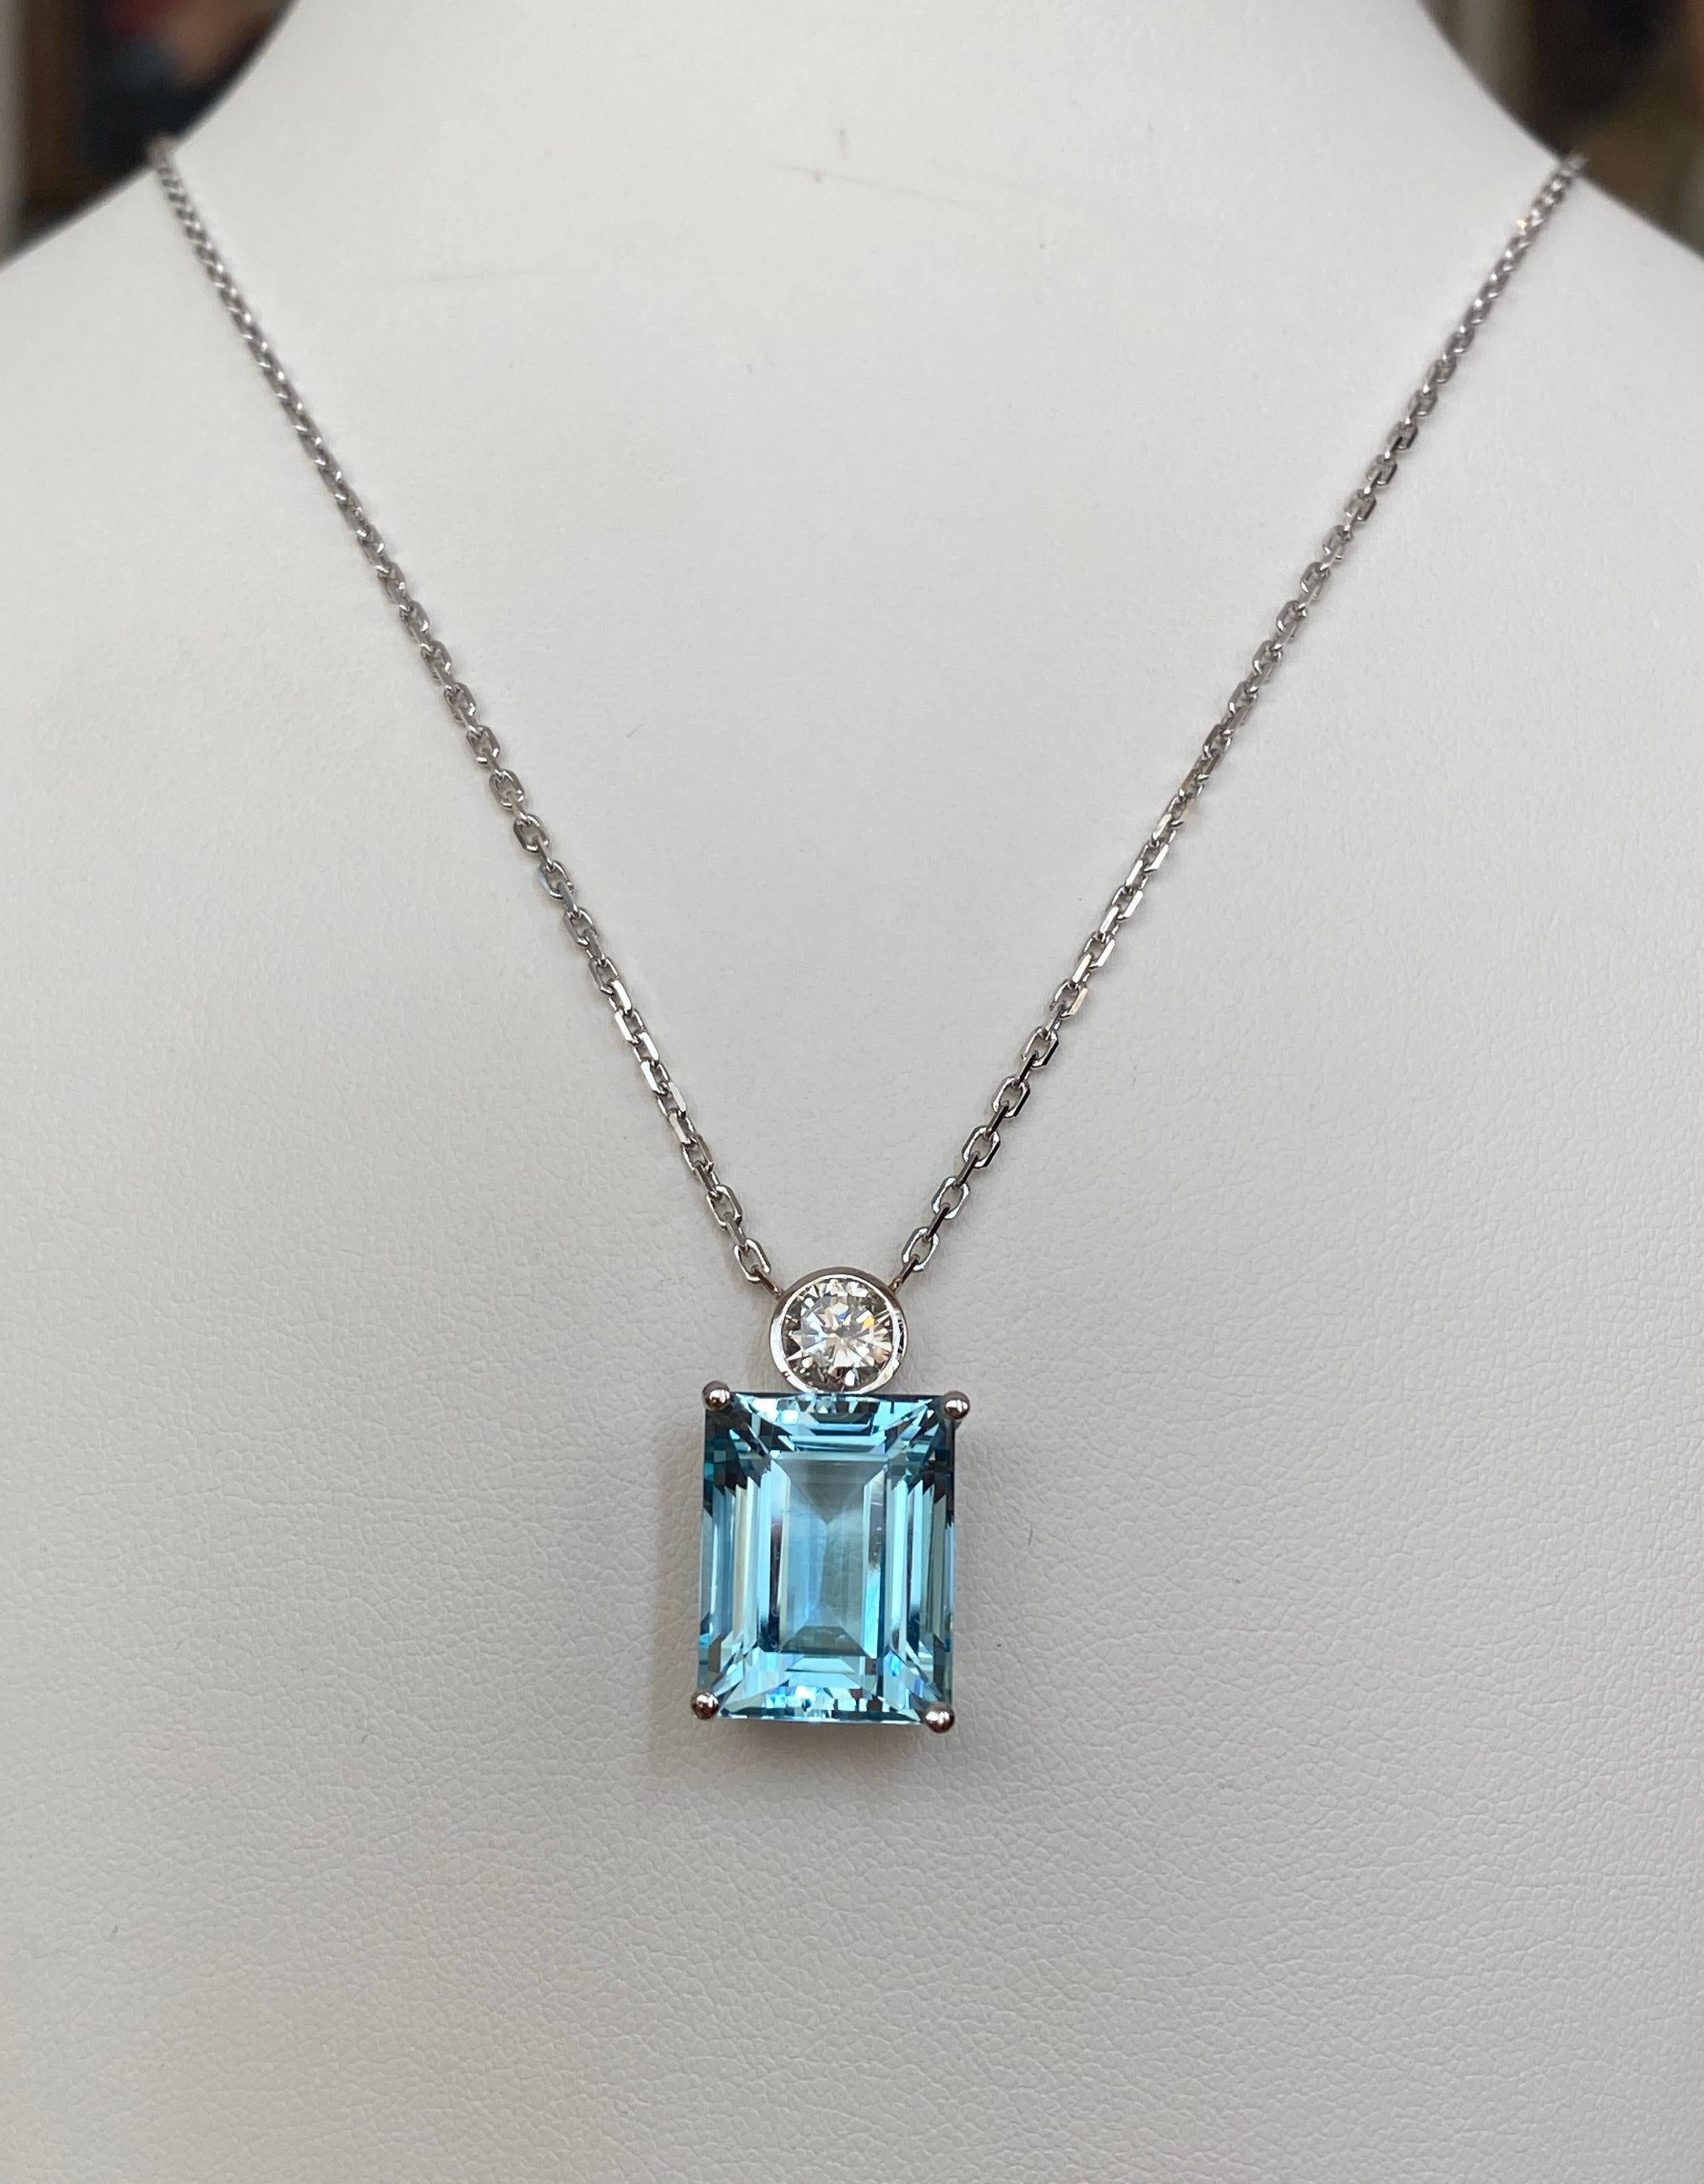 Contemporary 18 Karat White Gold Necklace with a Diamond Pendant Decorated with Aquamarine  For Sale